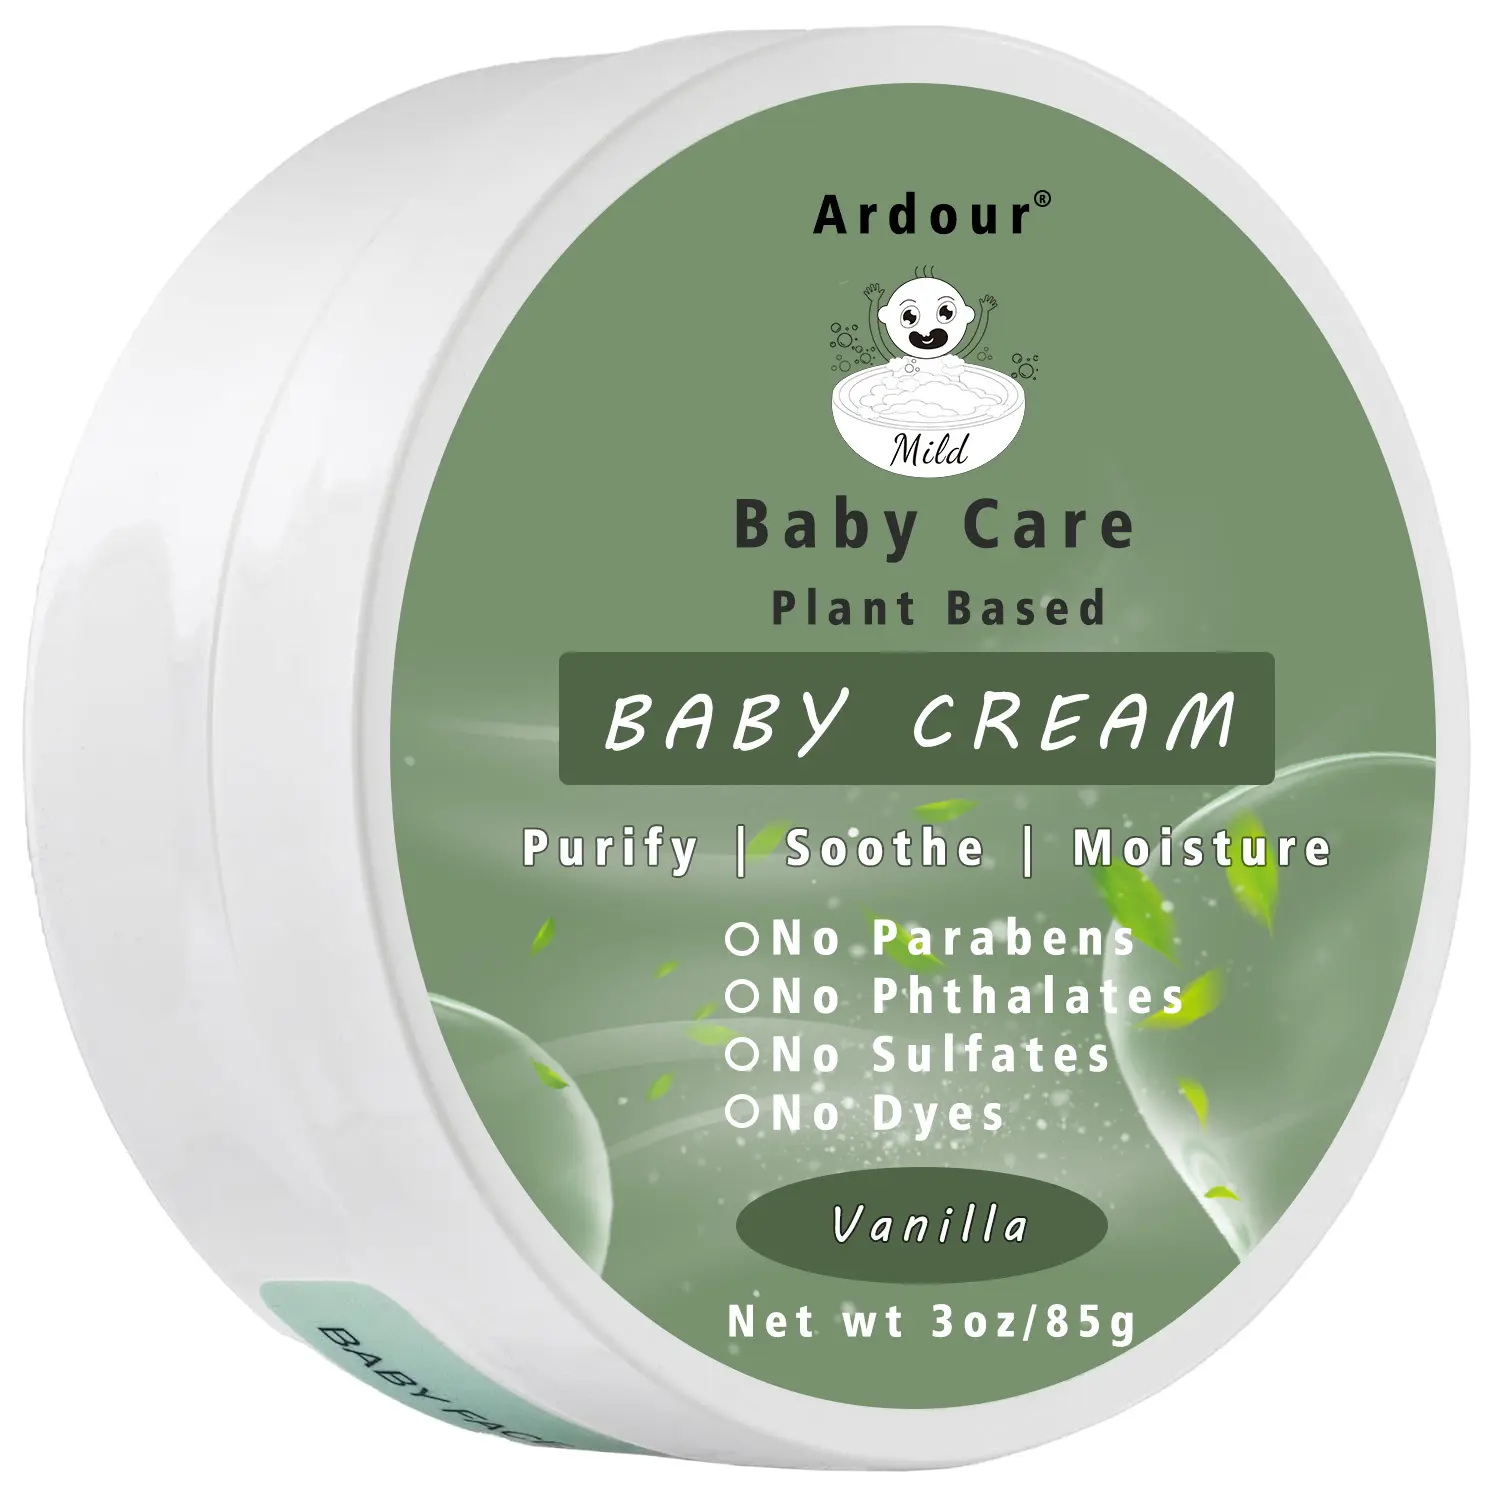 Vanilla Baby Cream Lotion For Babies Kids Children Newborn Infants Gentle For Baby Body And Face Skin Care Butter Balm